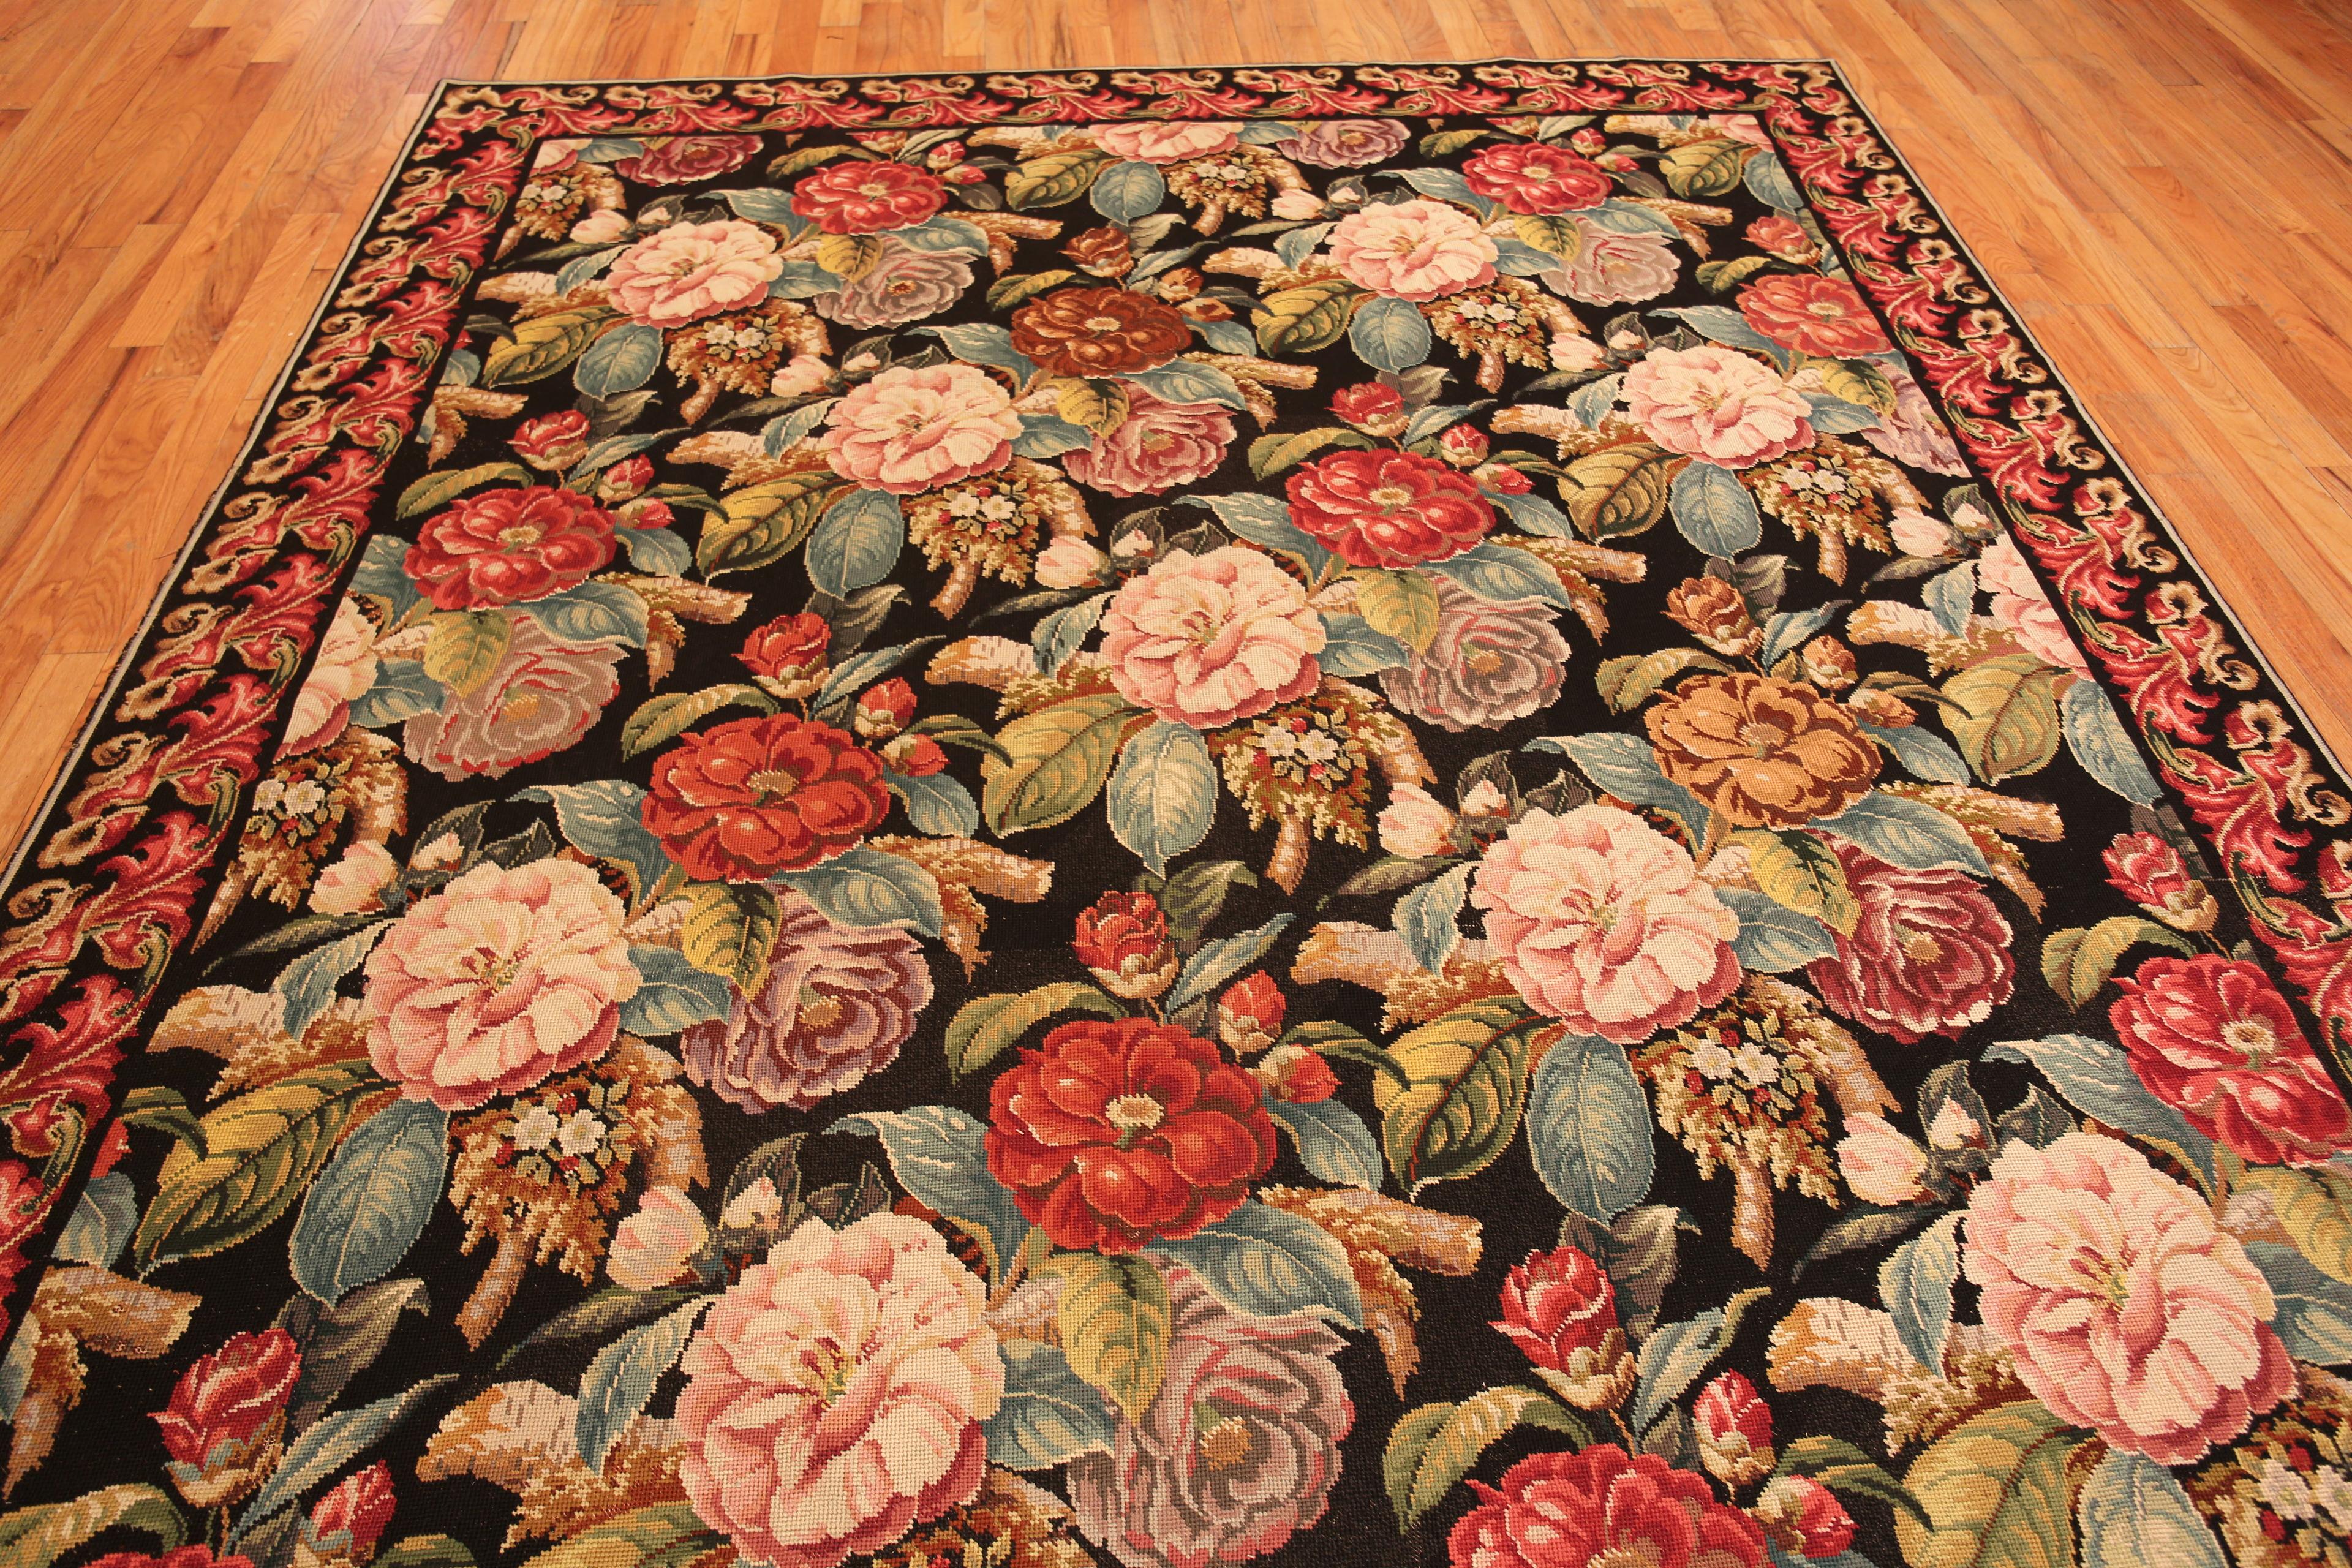 Tapis à l'aiguille floral anglais ancien, Pays d'origine : Angleterre, Circa date : 1920. Taille : 8 ft 8 in x 10 ft 5 in (2.64 m x 3.17 m)